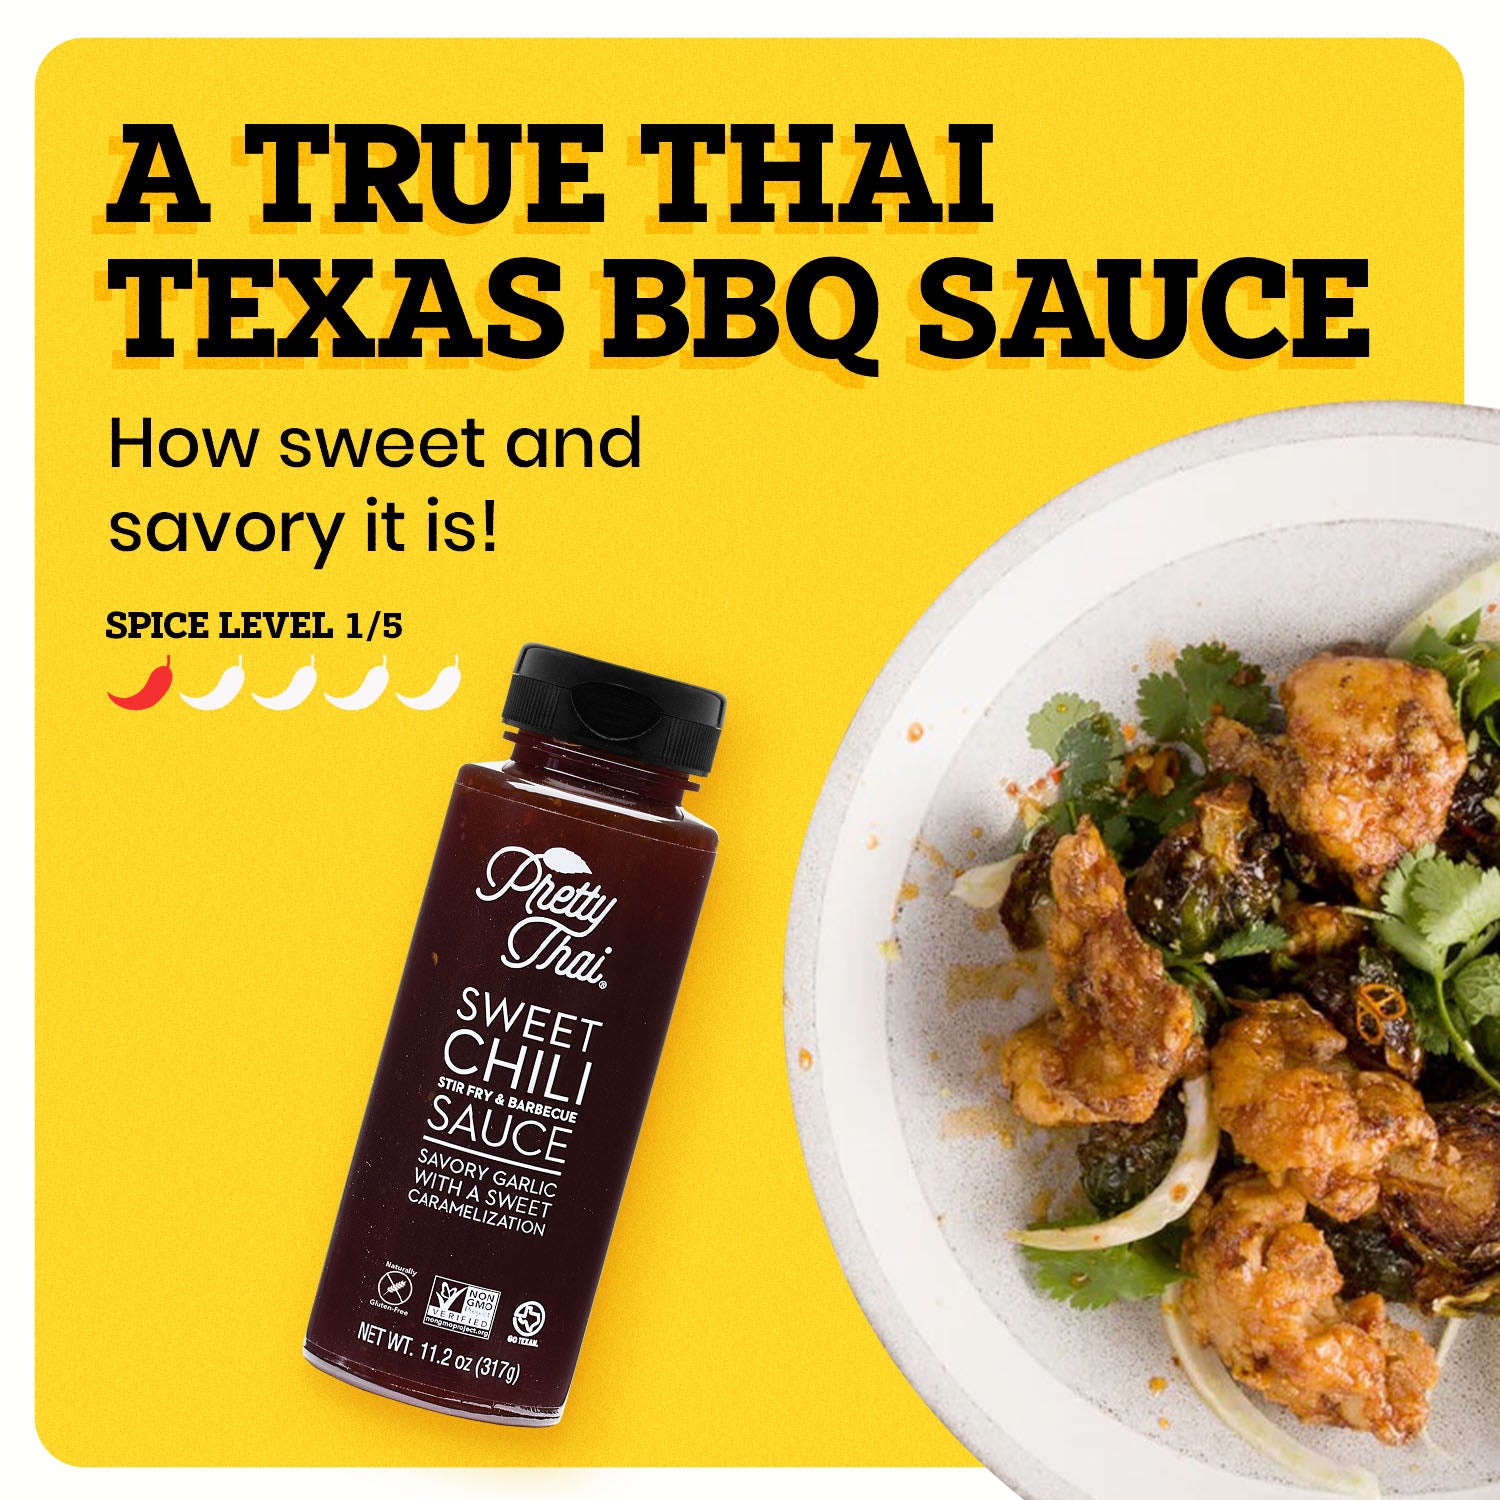 A bottle of Pretty Thai Sweet Chili Stir Fry and Barbecue Sauce, which has savory garlic with sweet caramelization. Net WT. 11.20z (317 g) is also written on it under the different labels. In the background mixture of red chilis and garlic pieces can be seen. 